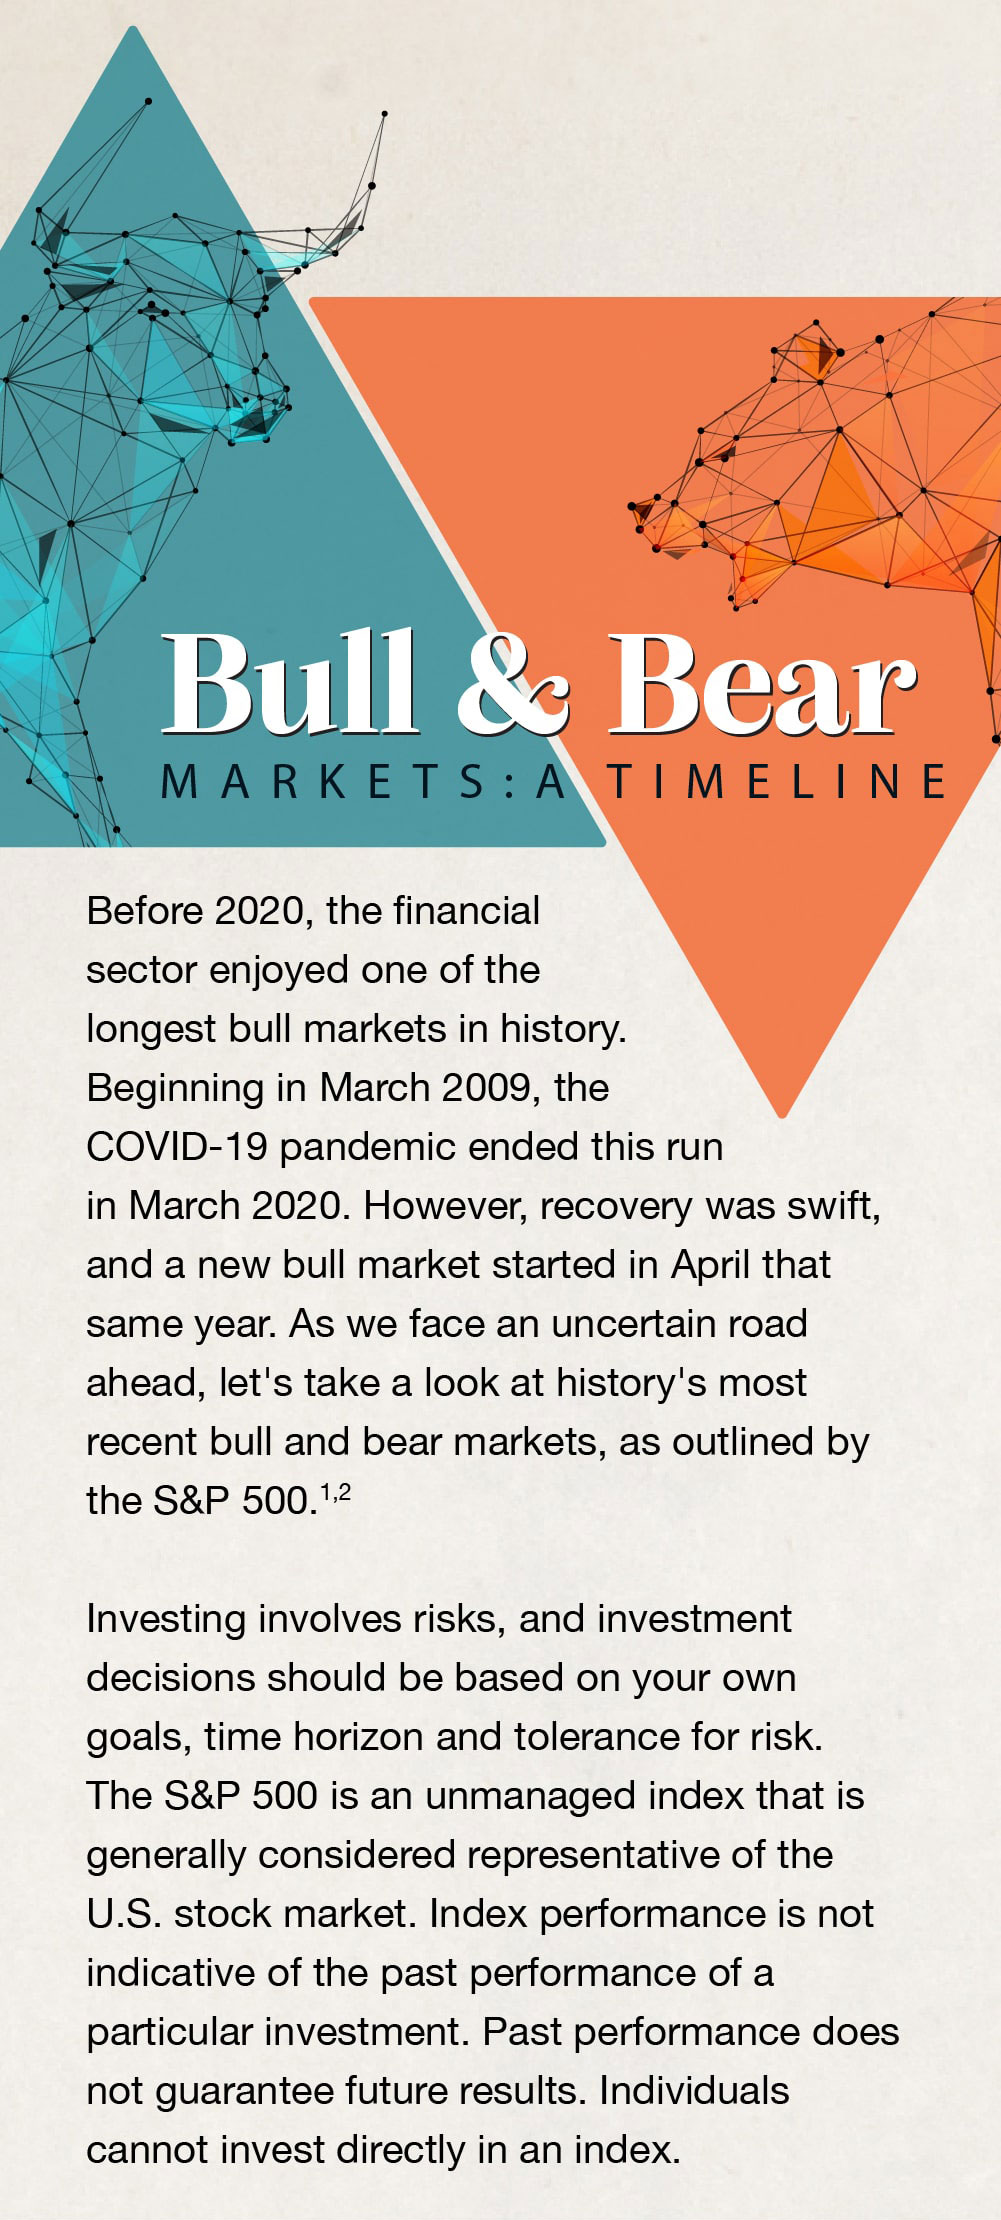 Bull & Bear Markets: A Timeline. Before 2020, the financial sector enjoyed one of the longest bull markets in history. Beginning in March 2009, the covid 19 pandemic ended this run in March 2020. However, recovery was swift, and a new bull market started in April that same year. As we face an uncertain road ahead, let's take a look at history's most recent bull and bear markets, as outlined by the S&P 500. Sources 1 and 2. Investing involves risks, and investment decisions should be based on your own goals, time horizon and tolerance for risk. The S&P 500 is an unmanaged index that is generally considered representative of the U.S. stock market. Index performance is not indicative of the past performance of a particular investment. Past performance does not guarantee future results. Individuals cannot invest directly in an index.